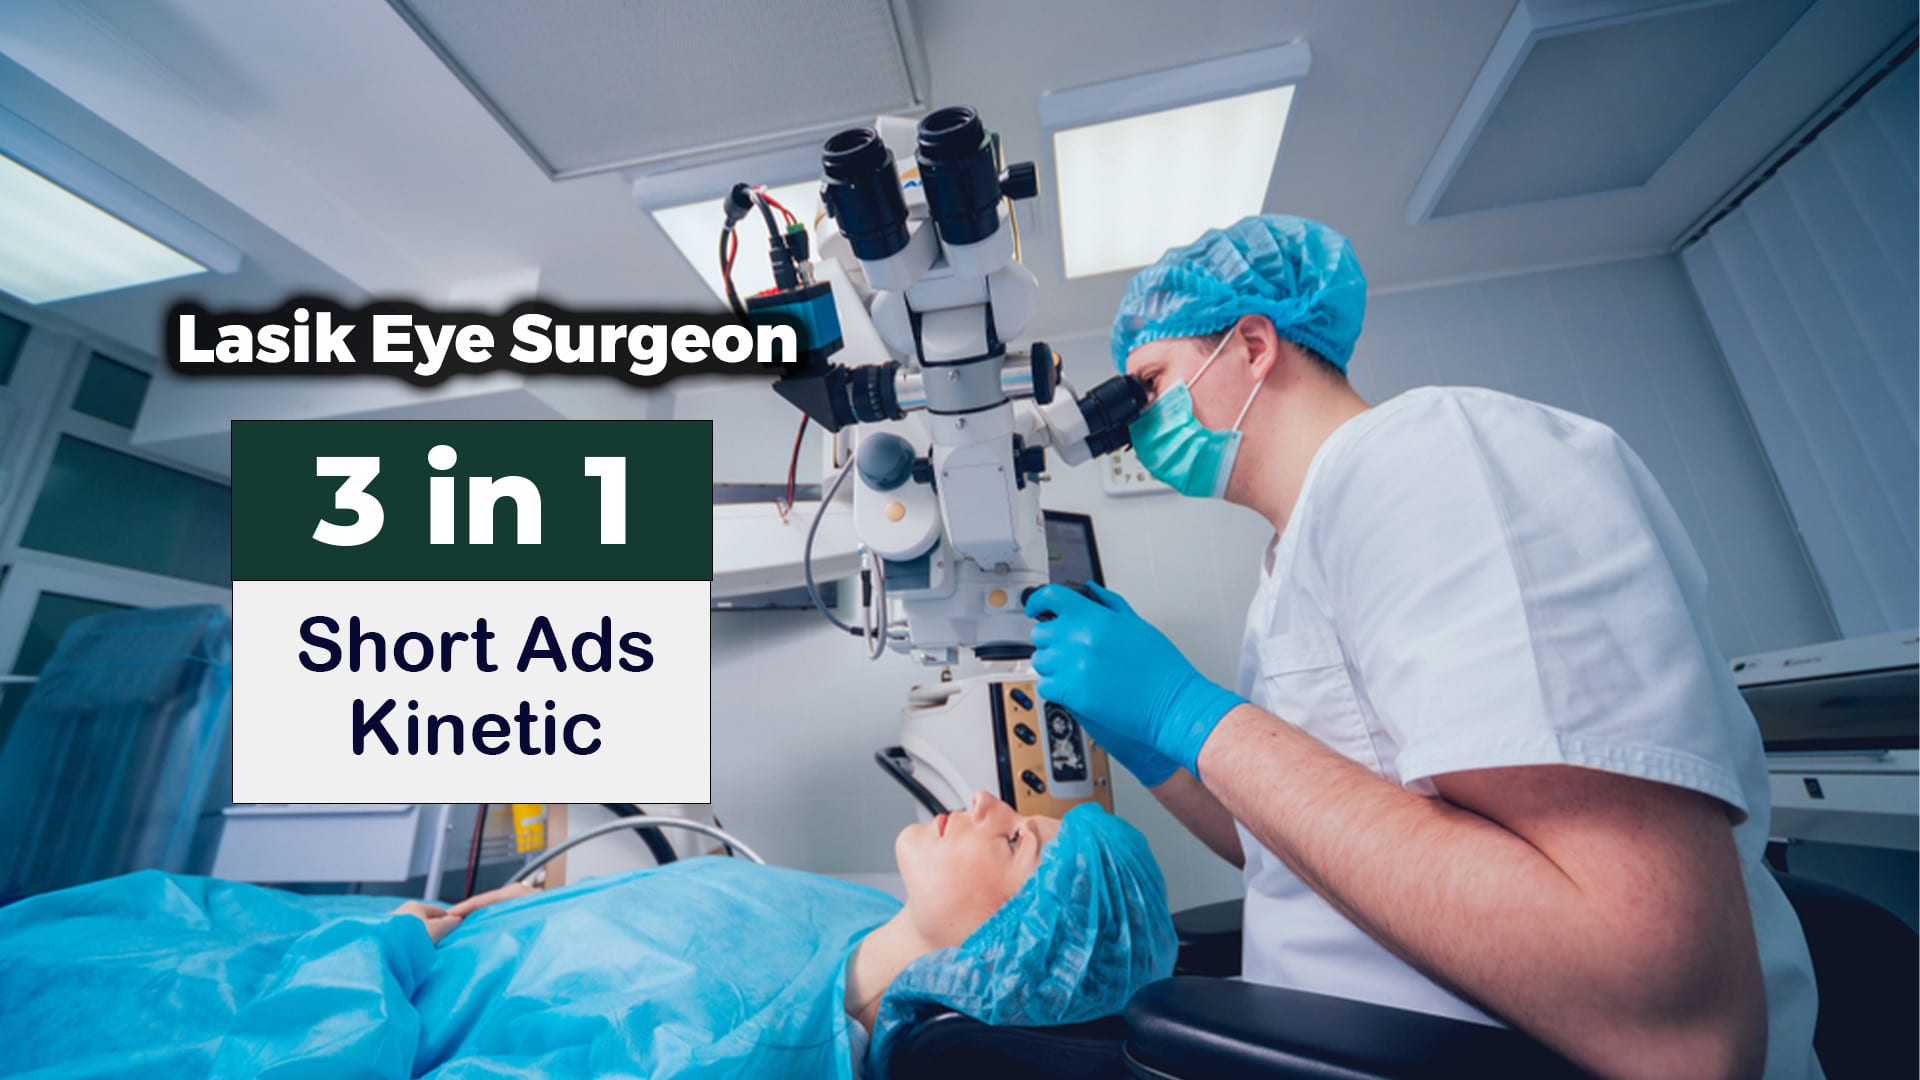 Do lasik eye surgery or cosmetic surgeon promo video ads by Shikhahasnat |  Fiverr